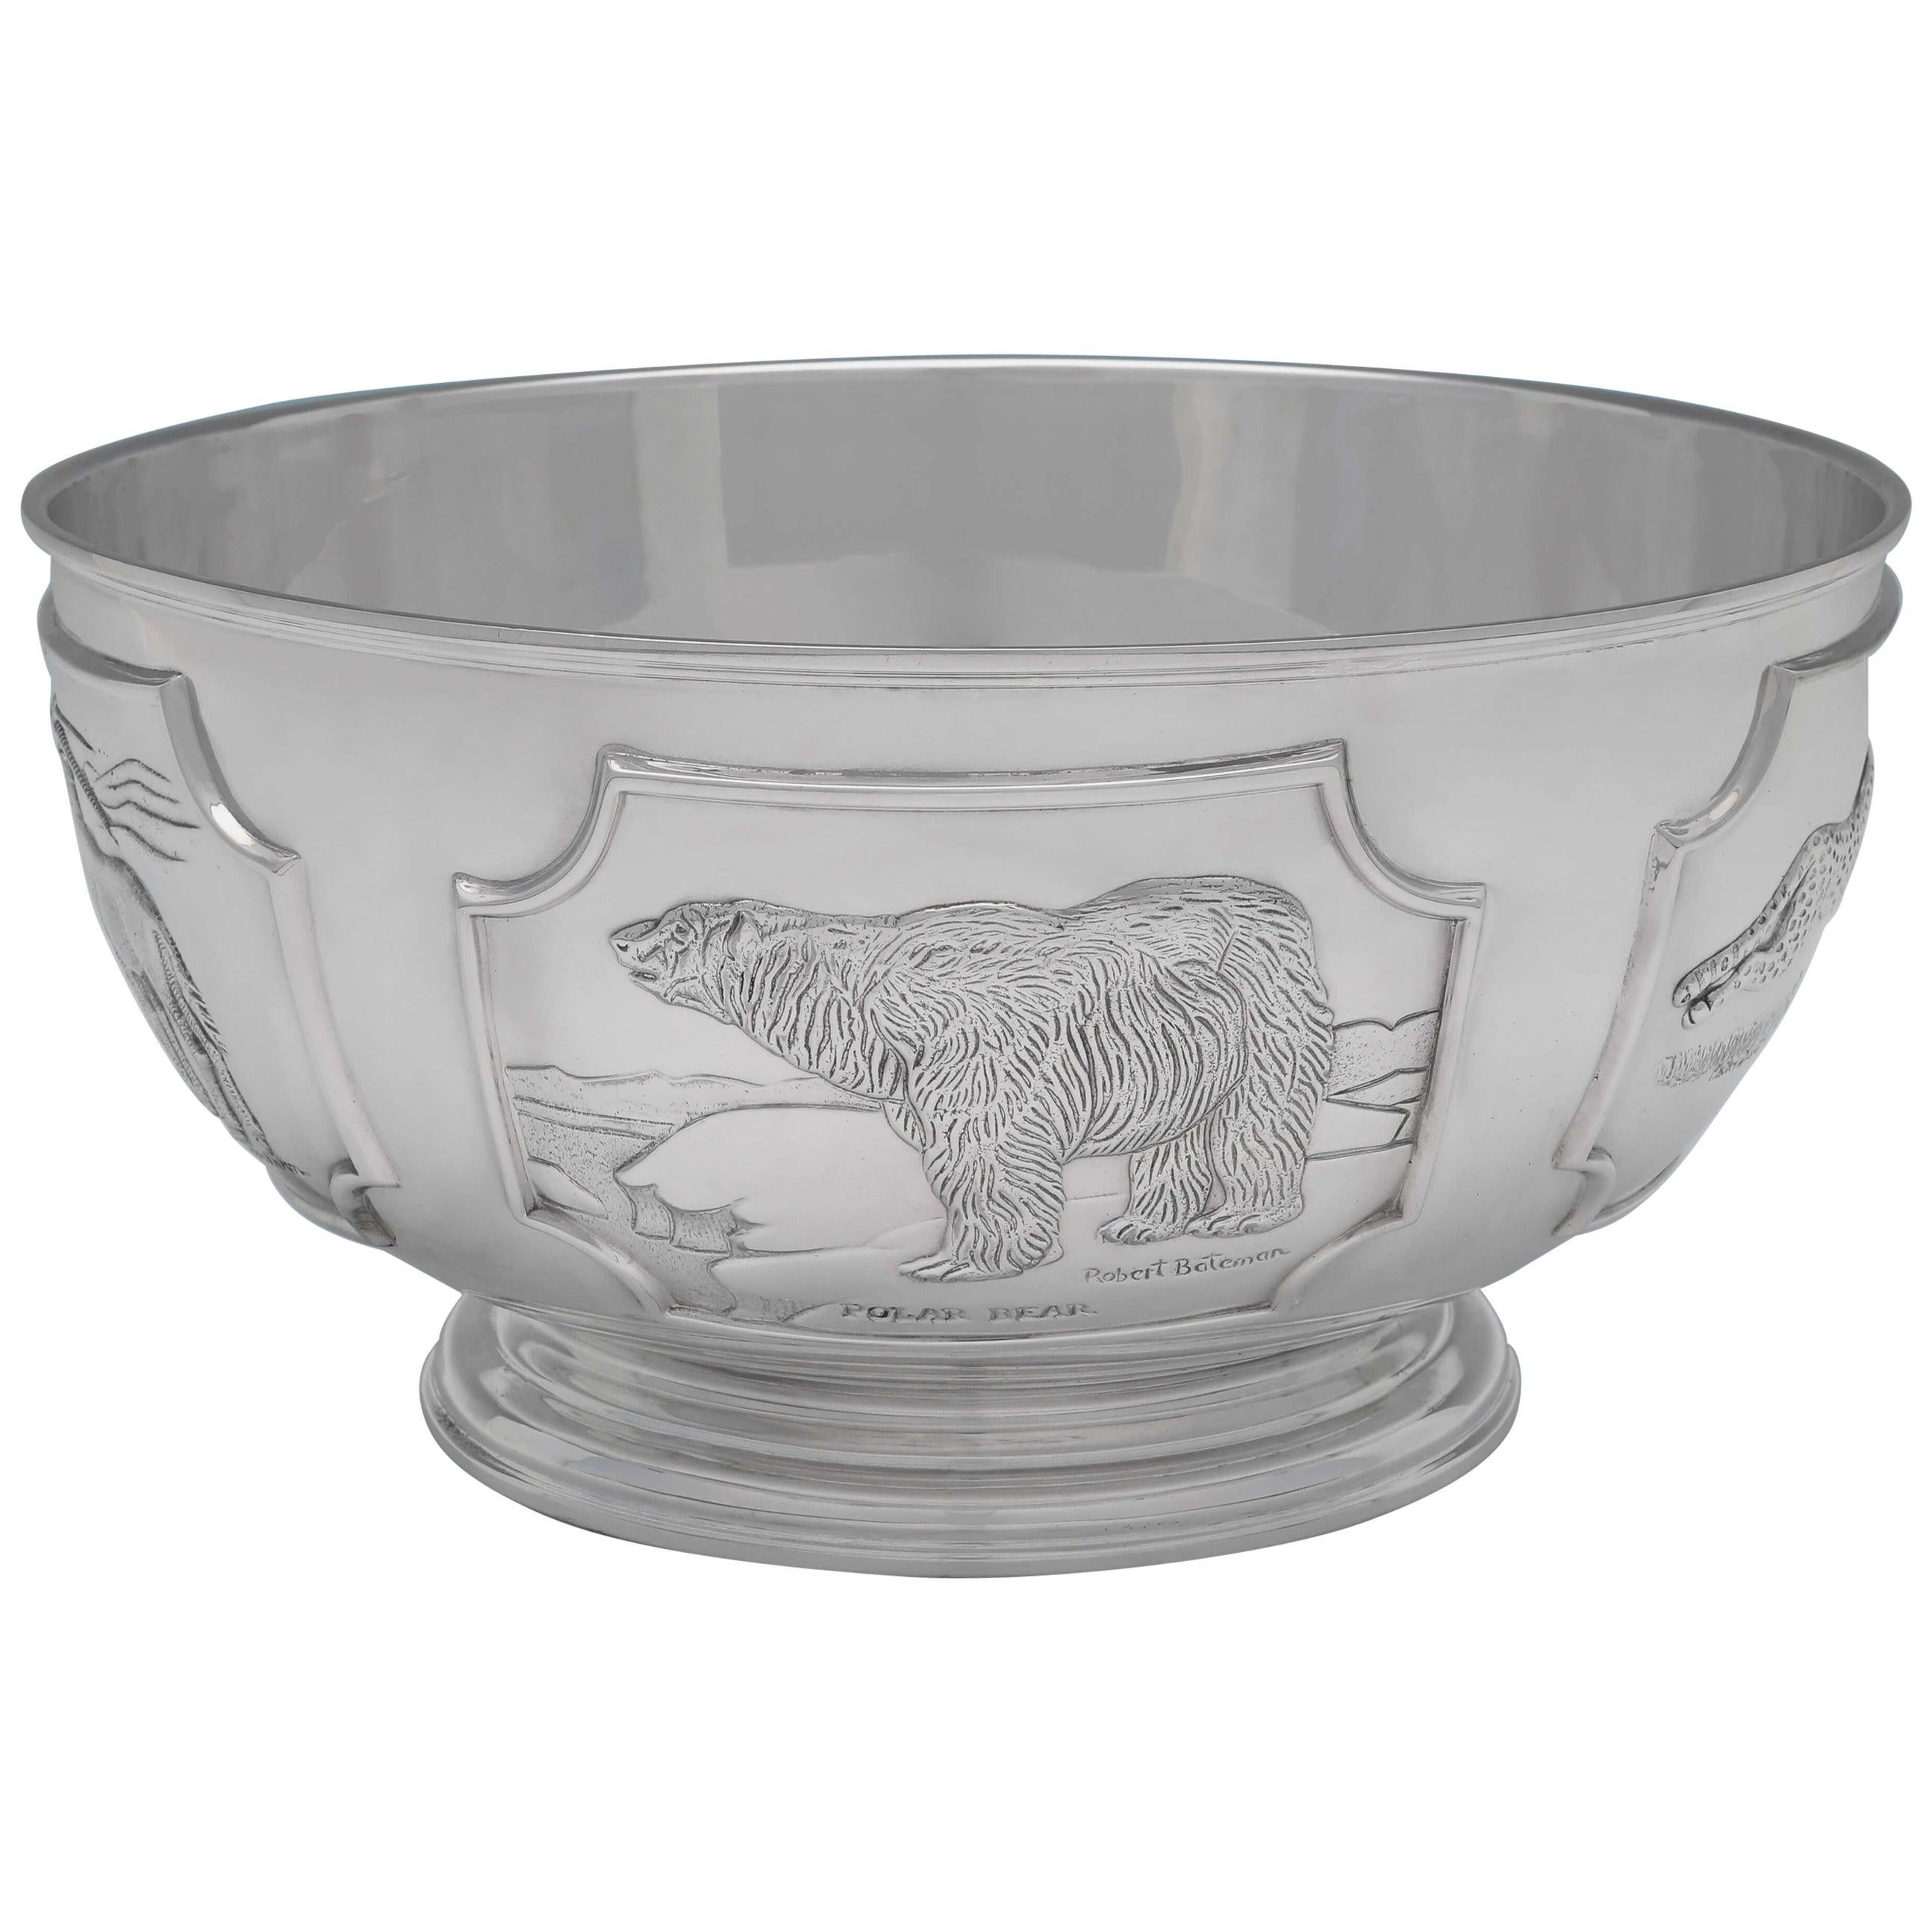 Limited Edition World Wildlife Fund Sterling Silver Bowl by Tessiers London 1977